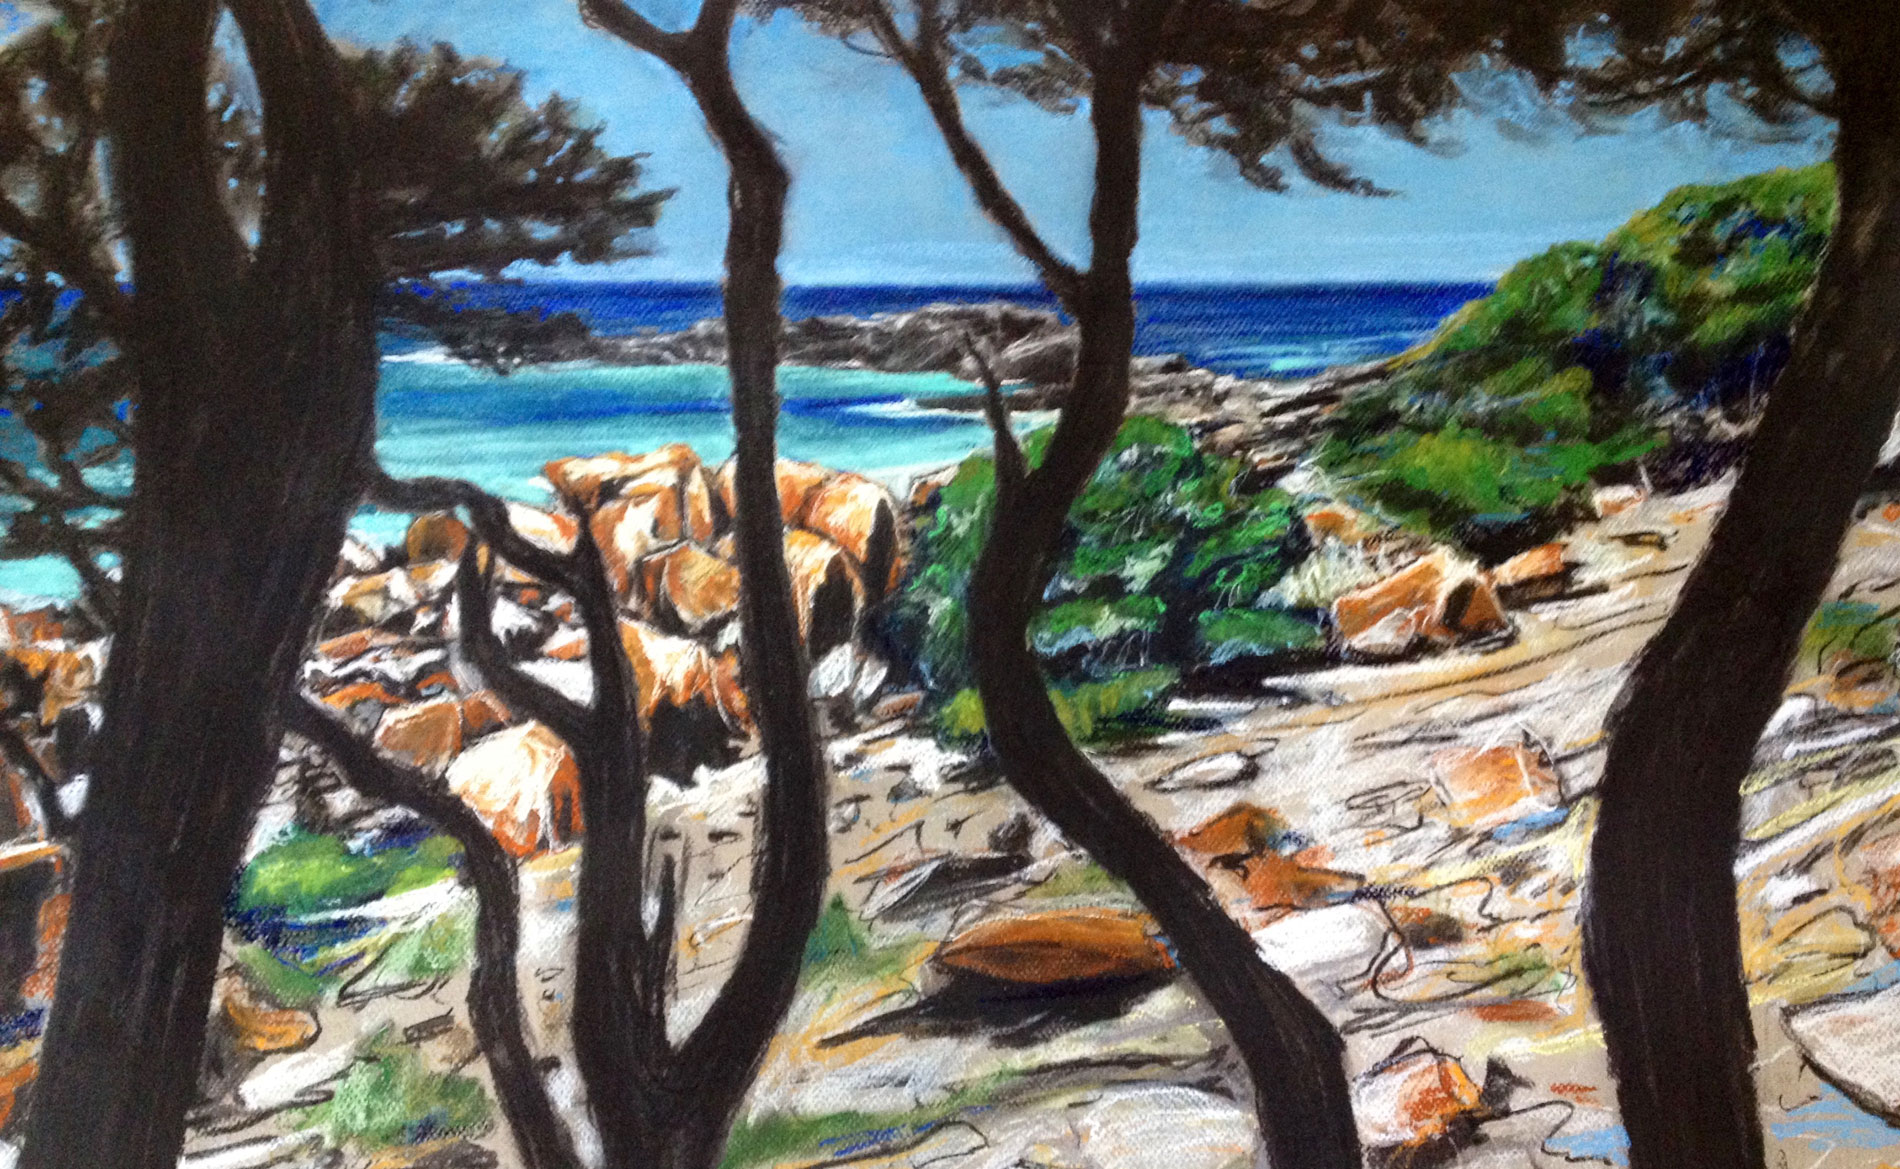 Bunker bay, charcoal and pastel, 76x56cm, Harvey Mullen